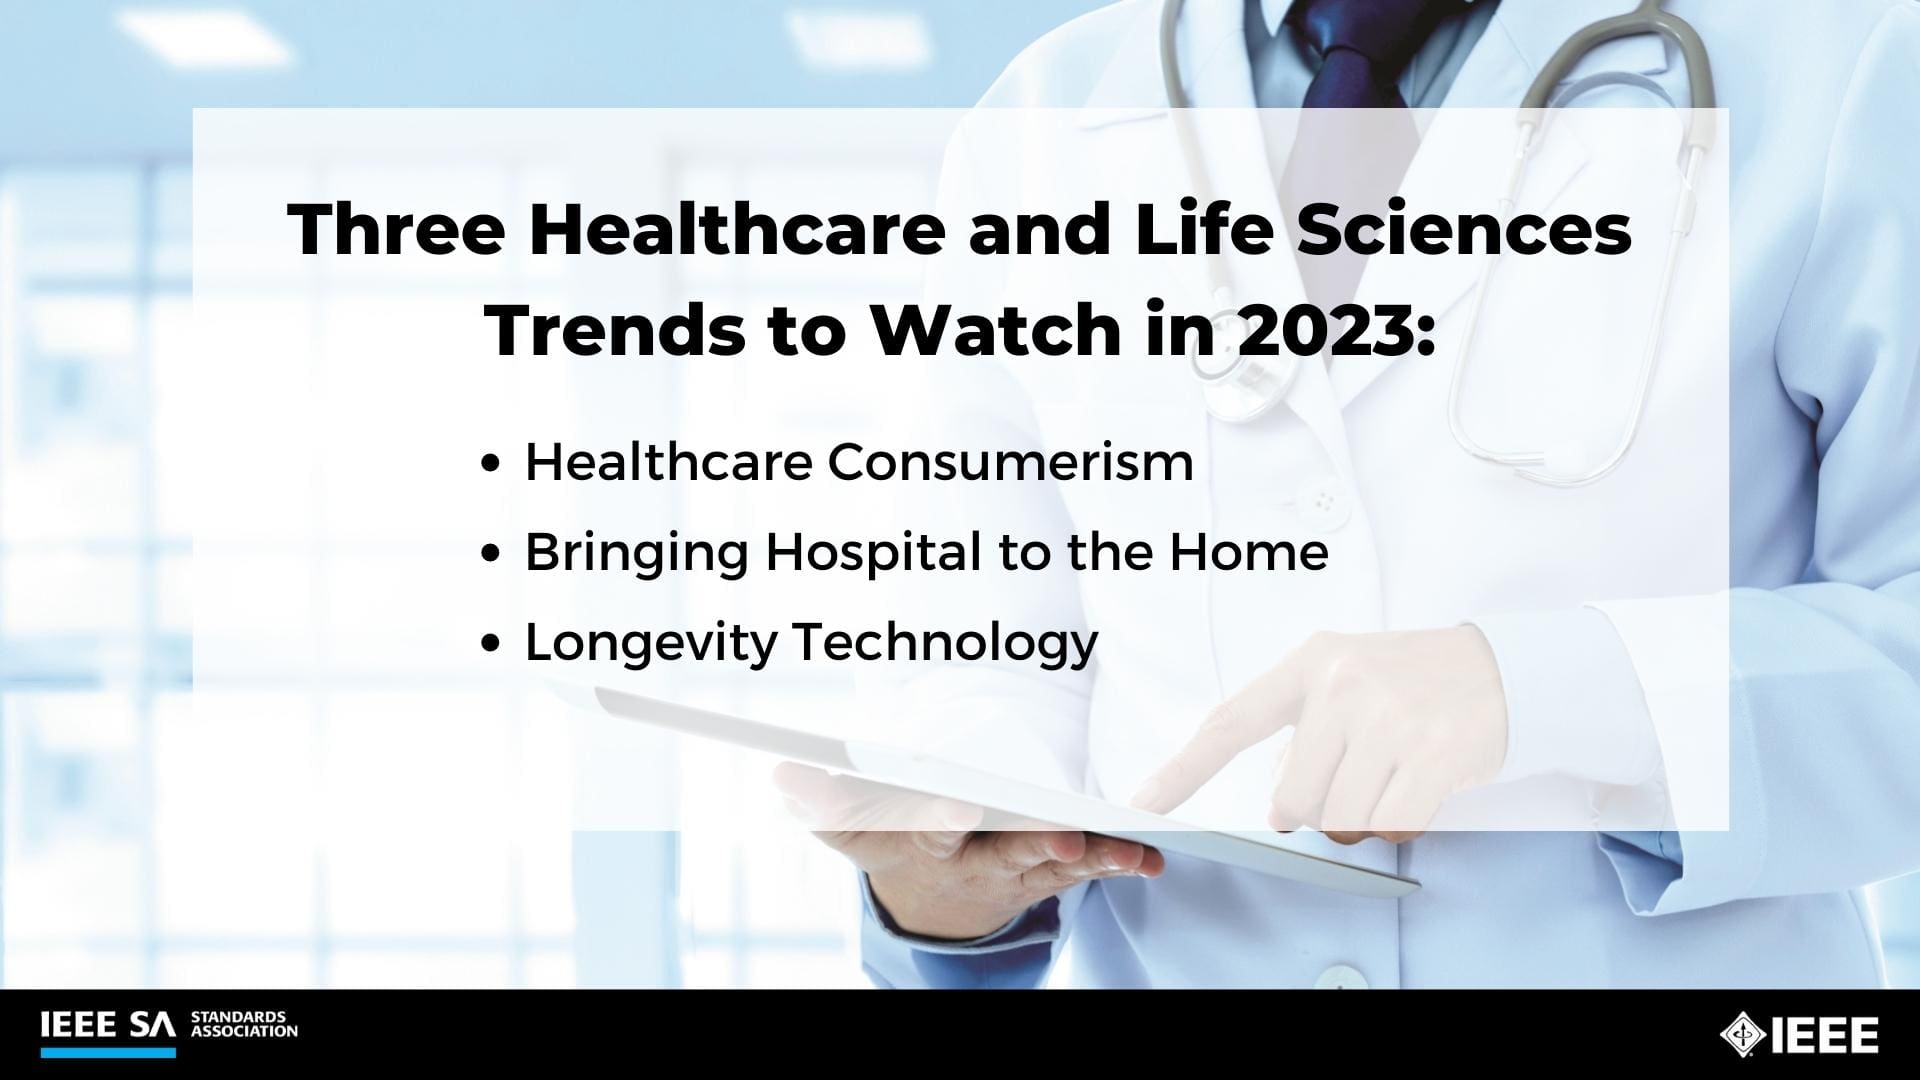 Three Healthcare and Life Sciences Trends to Watch in 2023: Healthcare Consumerism; Bringing Hospital to the Home; Longevity Technology